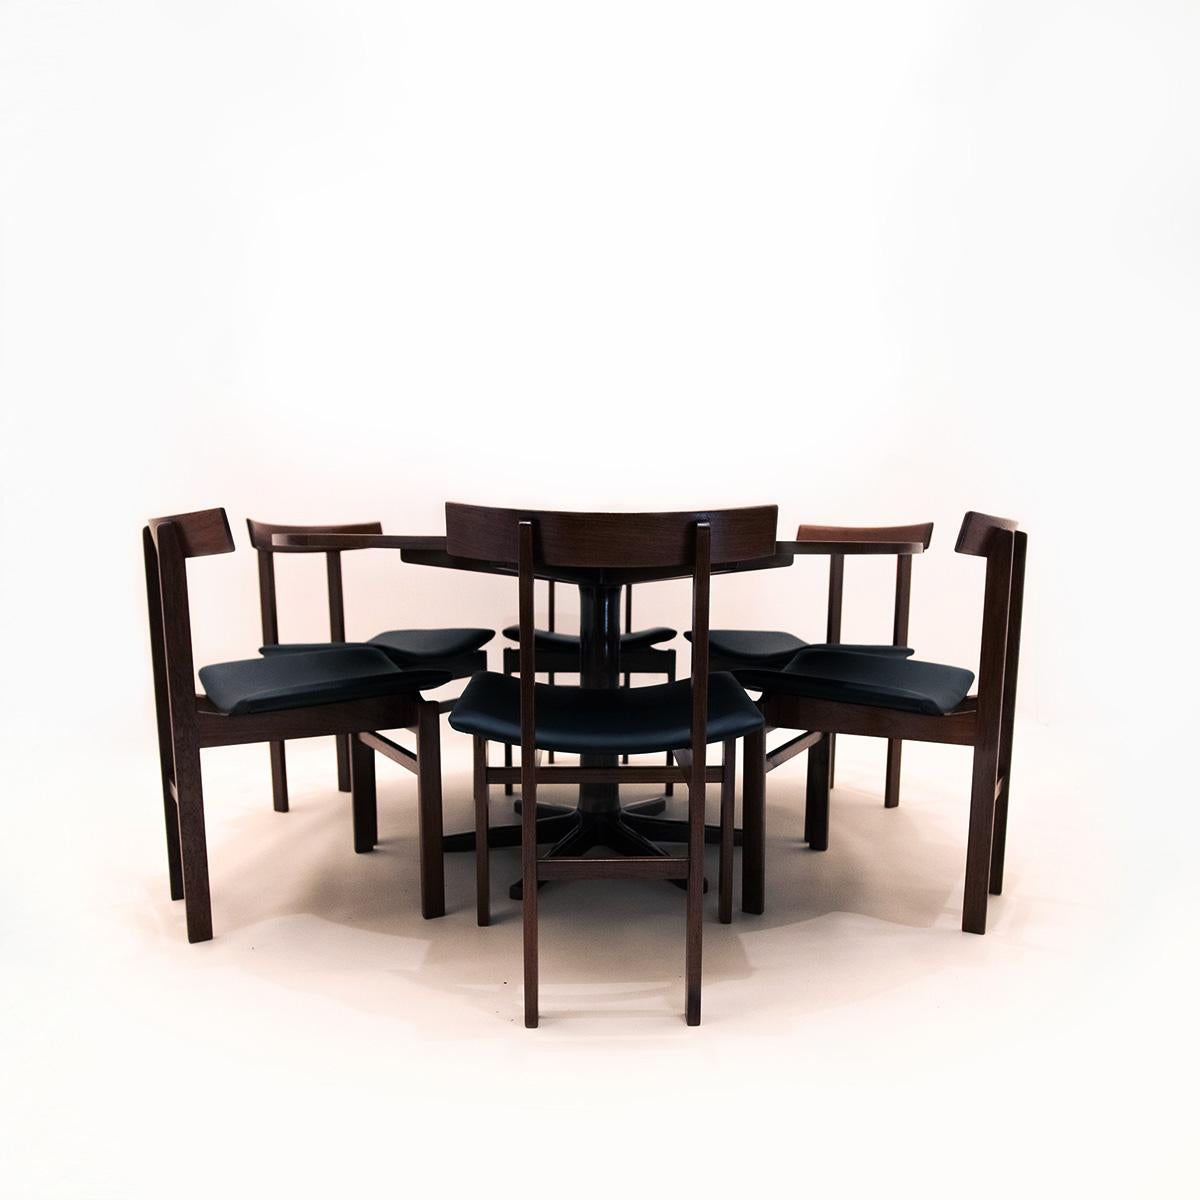 Danish Mid-Century Modern Dining Set with 6 Chairs and Extending Dining Table In Good Condition In Highclere, Newbury